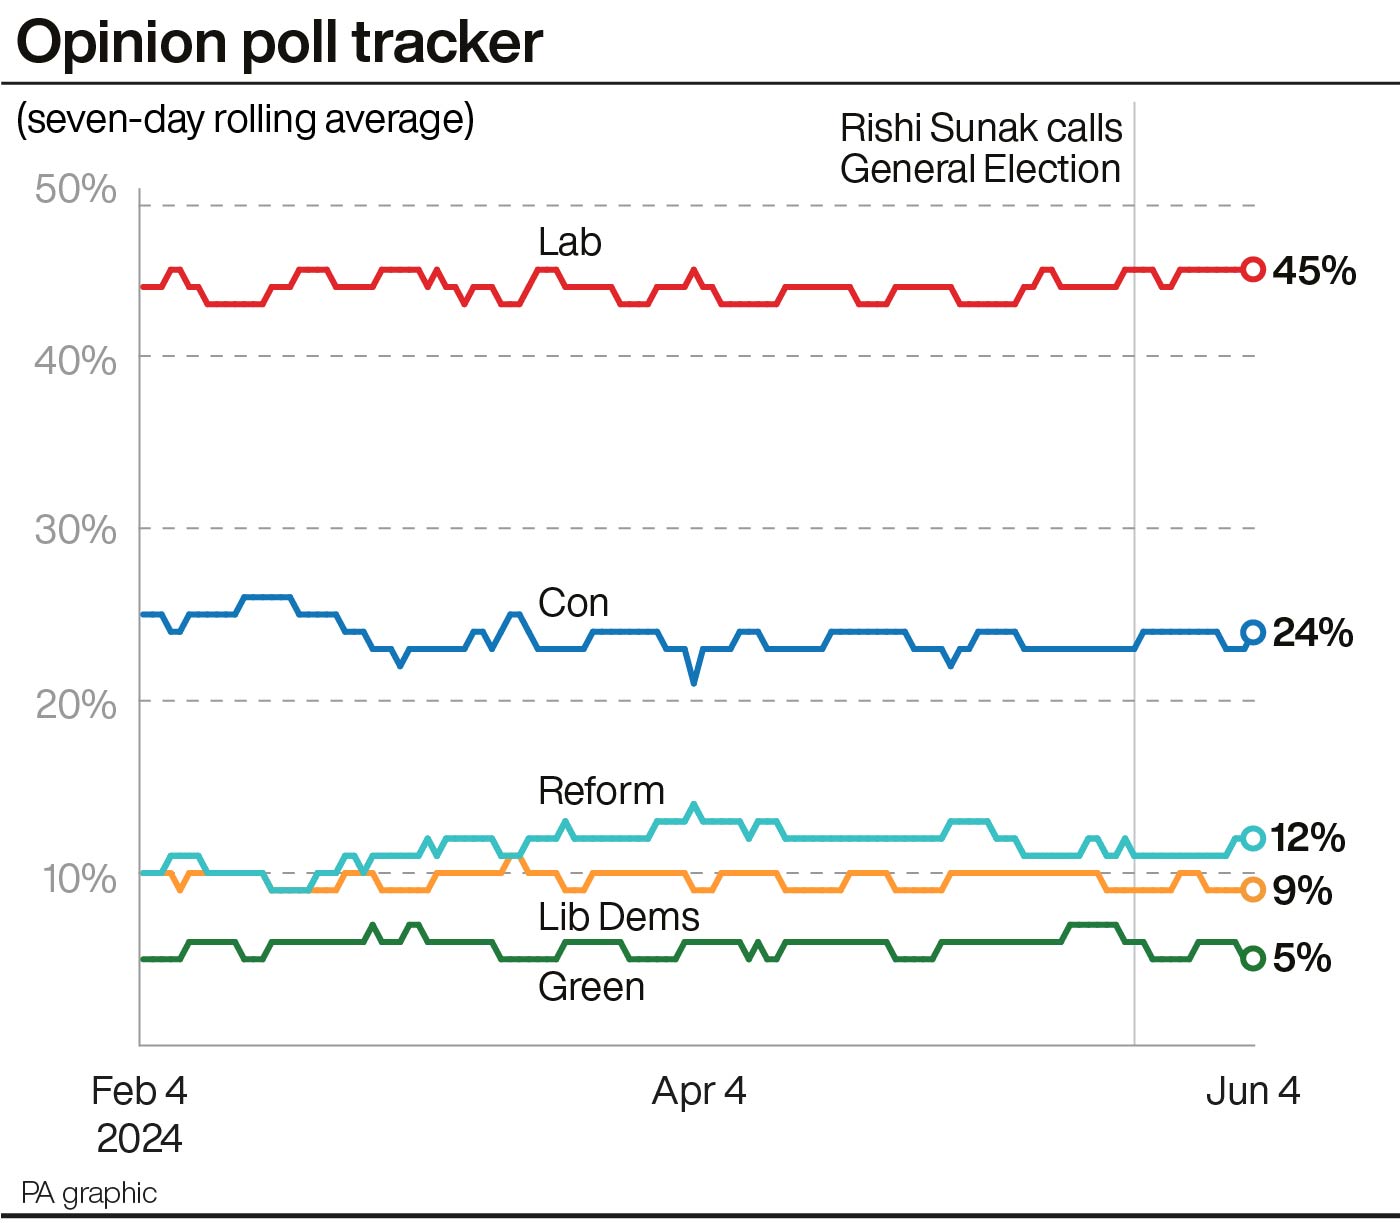 A rolling seven-day opinion poll tracking graphic showing Labour on 43%, Conservatives 26%, Reform 12%, Liberal Democrats 11%, Green 3% and SNP 3%. Source PA Graphics 